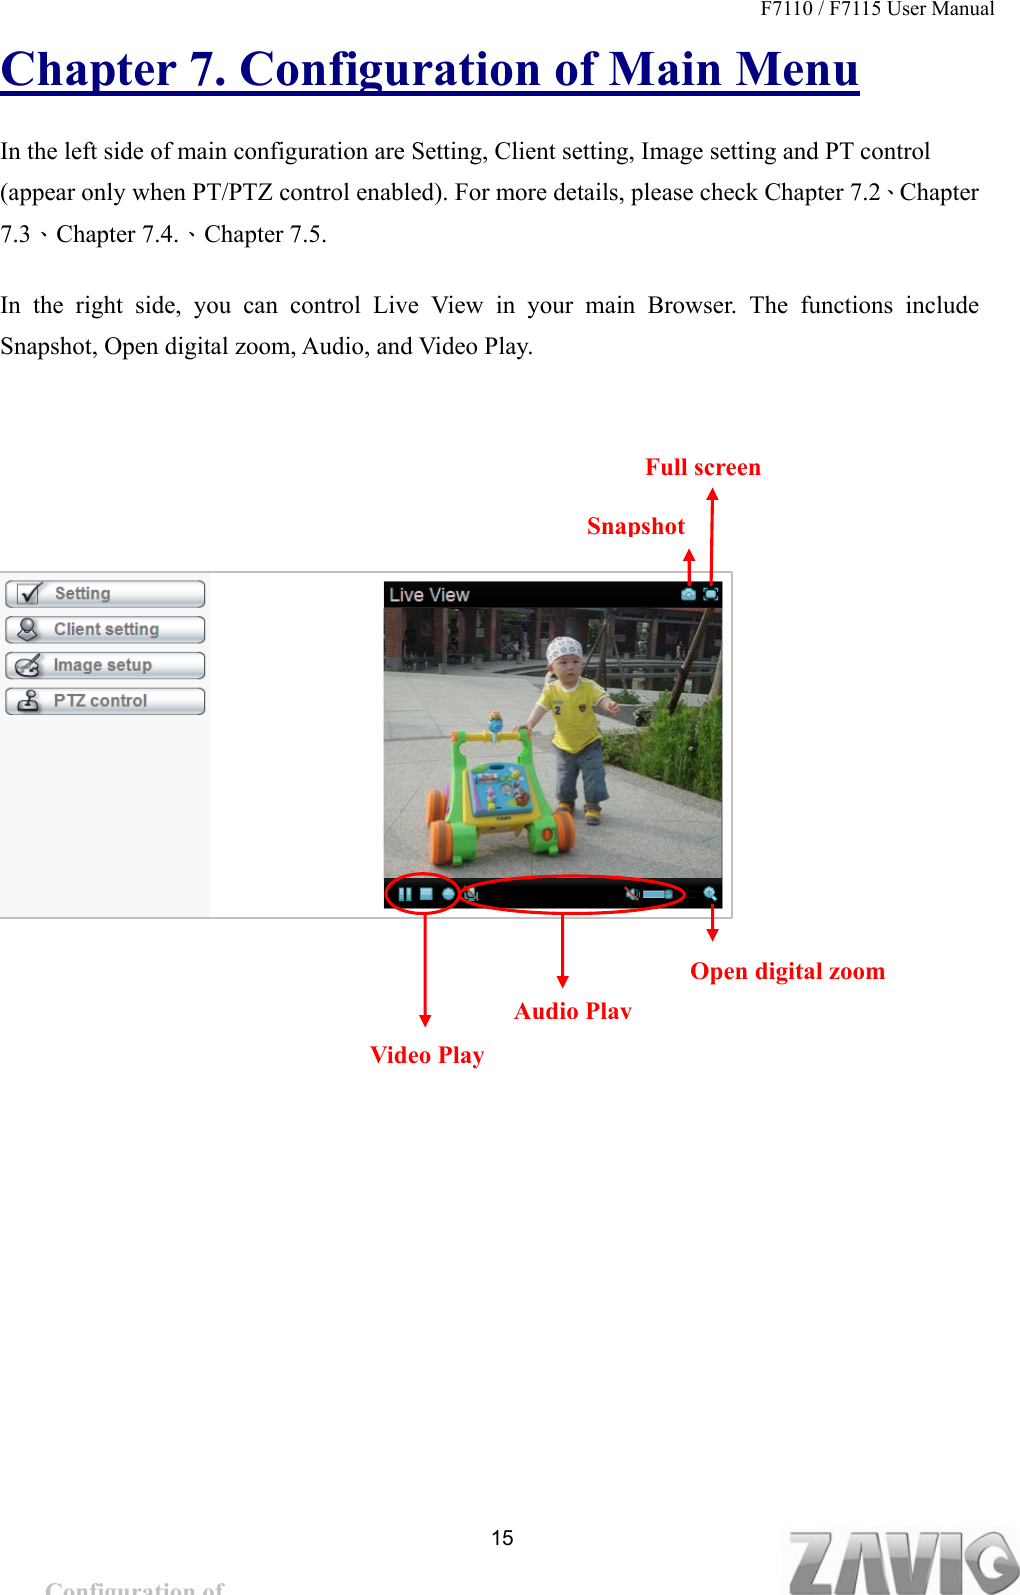 F7110 / F7115 User Manual   Chapter 7. Configuration of Main Menu In the left side of main configuration are Setting, Client setting, Image setting and PT control (appear only when PT/PTZ control enabled). For more details, please check Chapter 7.2、Chapter 7.3、Chapter 7.4.、Chapter 7.5. In the right side, you can control Live View in your main Browser. The functions include Snapshot, Open digital zoom, Audio, and Video Play.    Full screen   15Snapshot    Open digital zoom Audio PlayVideo Play Configuration of Main Menu 